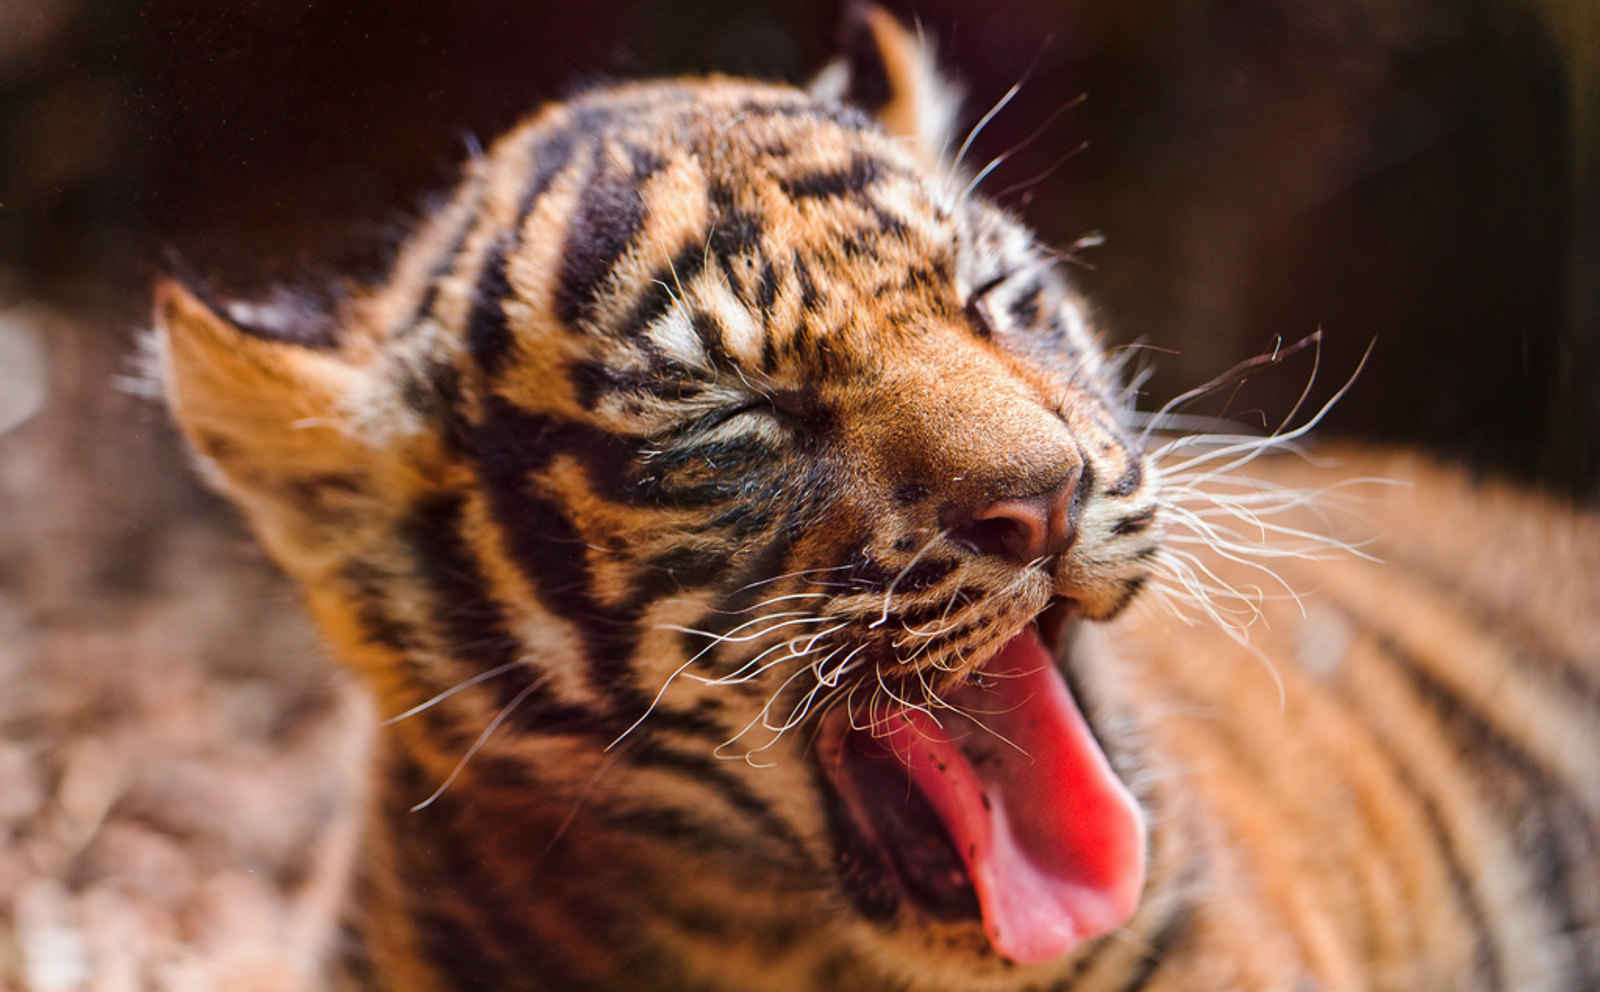 How Our Love For Sharing Cute Videos and Pictures of Exotic Animals May Actually Harm Them